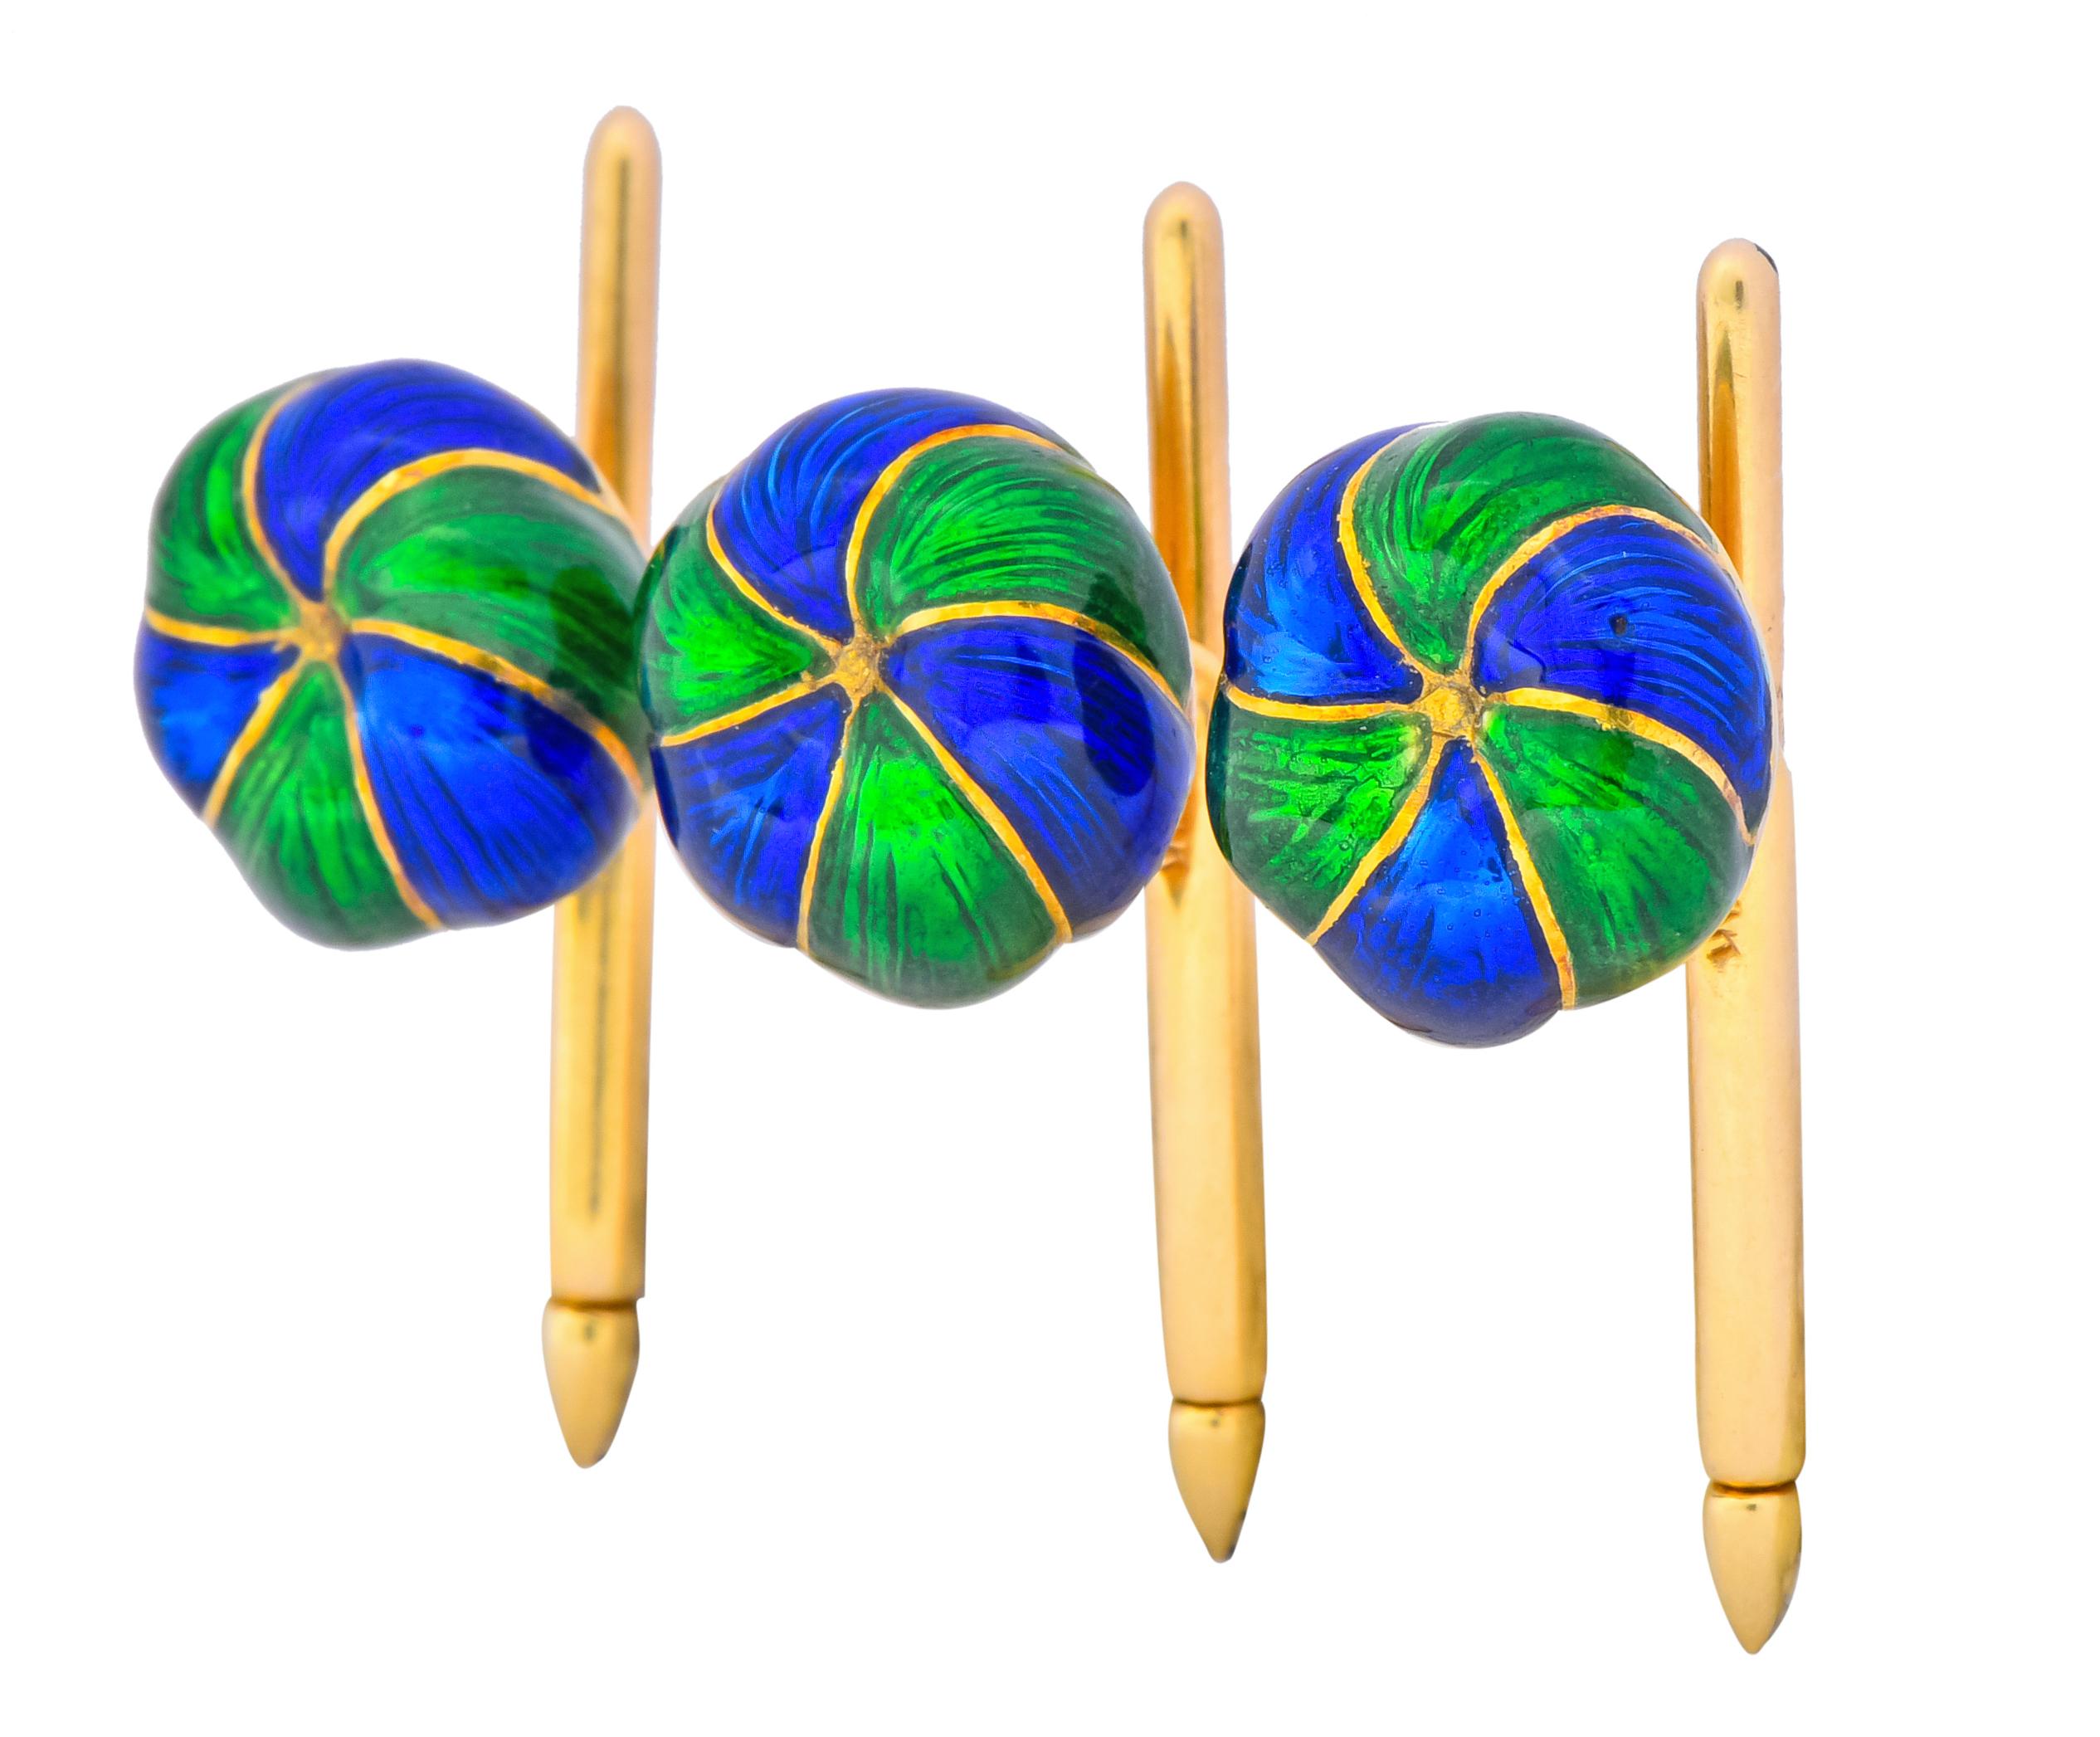 Featuring 18 karat gold stylized and domed button studs with swirled green and cobalt blue enamel and tension release bars

Central button is domed with even depth and studs are domed with graduating depth 

Circa 1970

Marked 18k for 18 karat gold